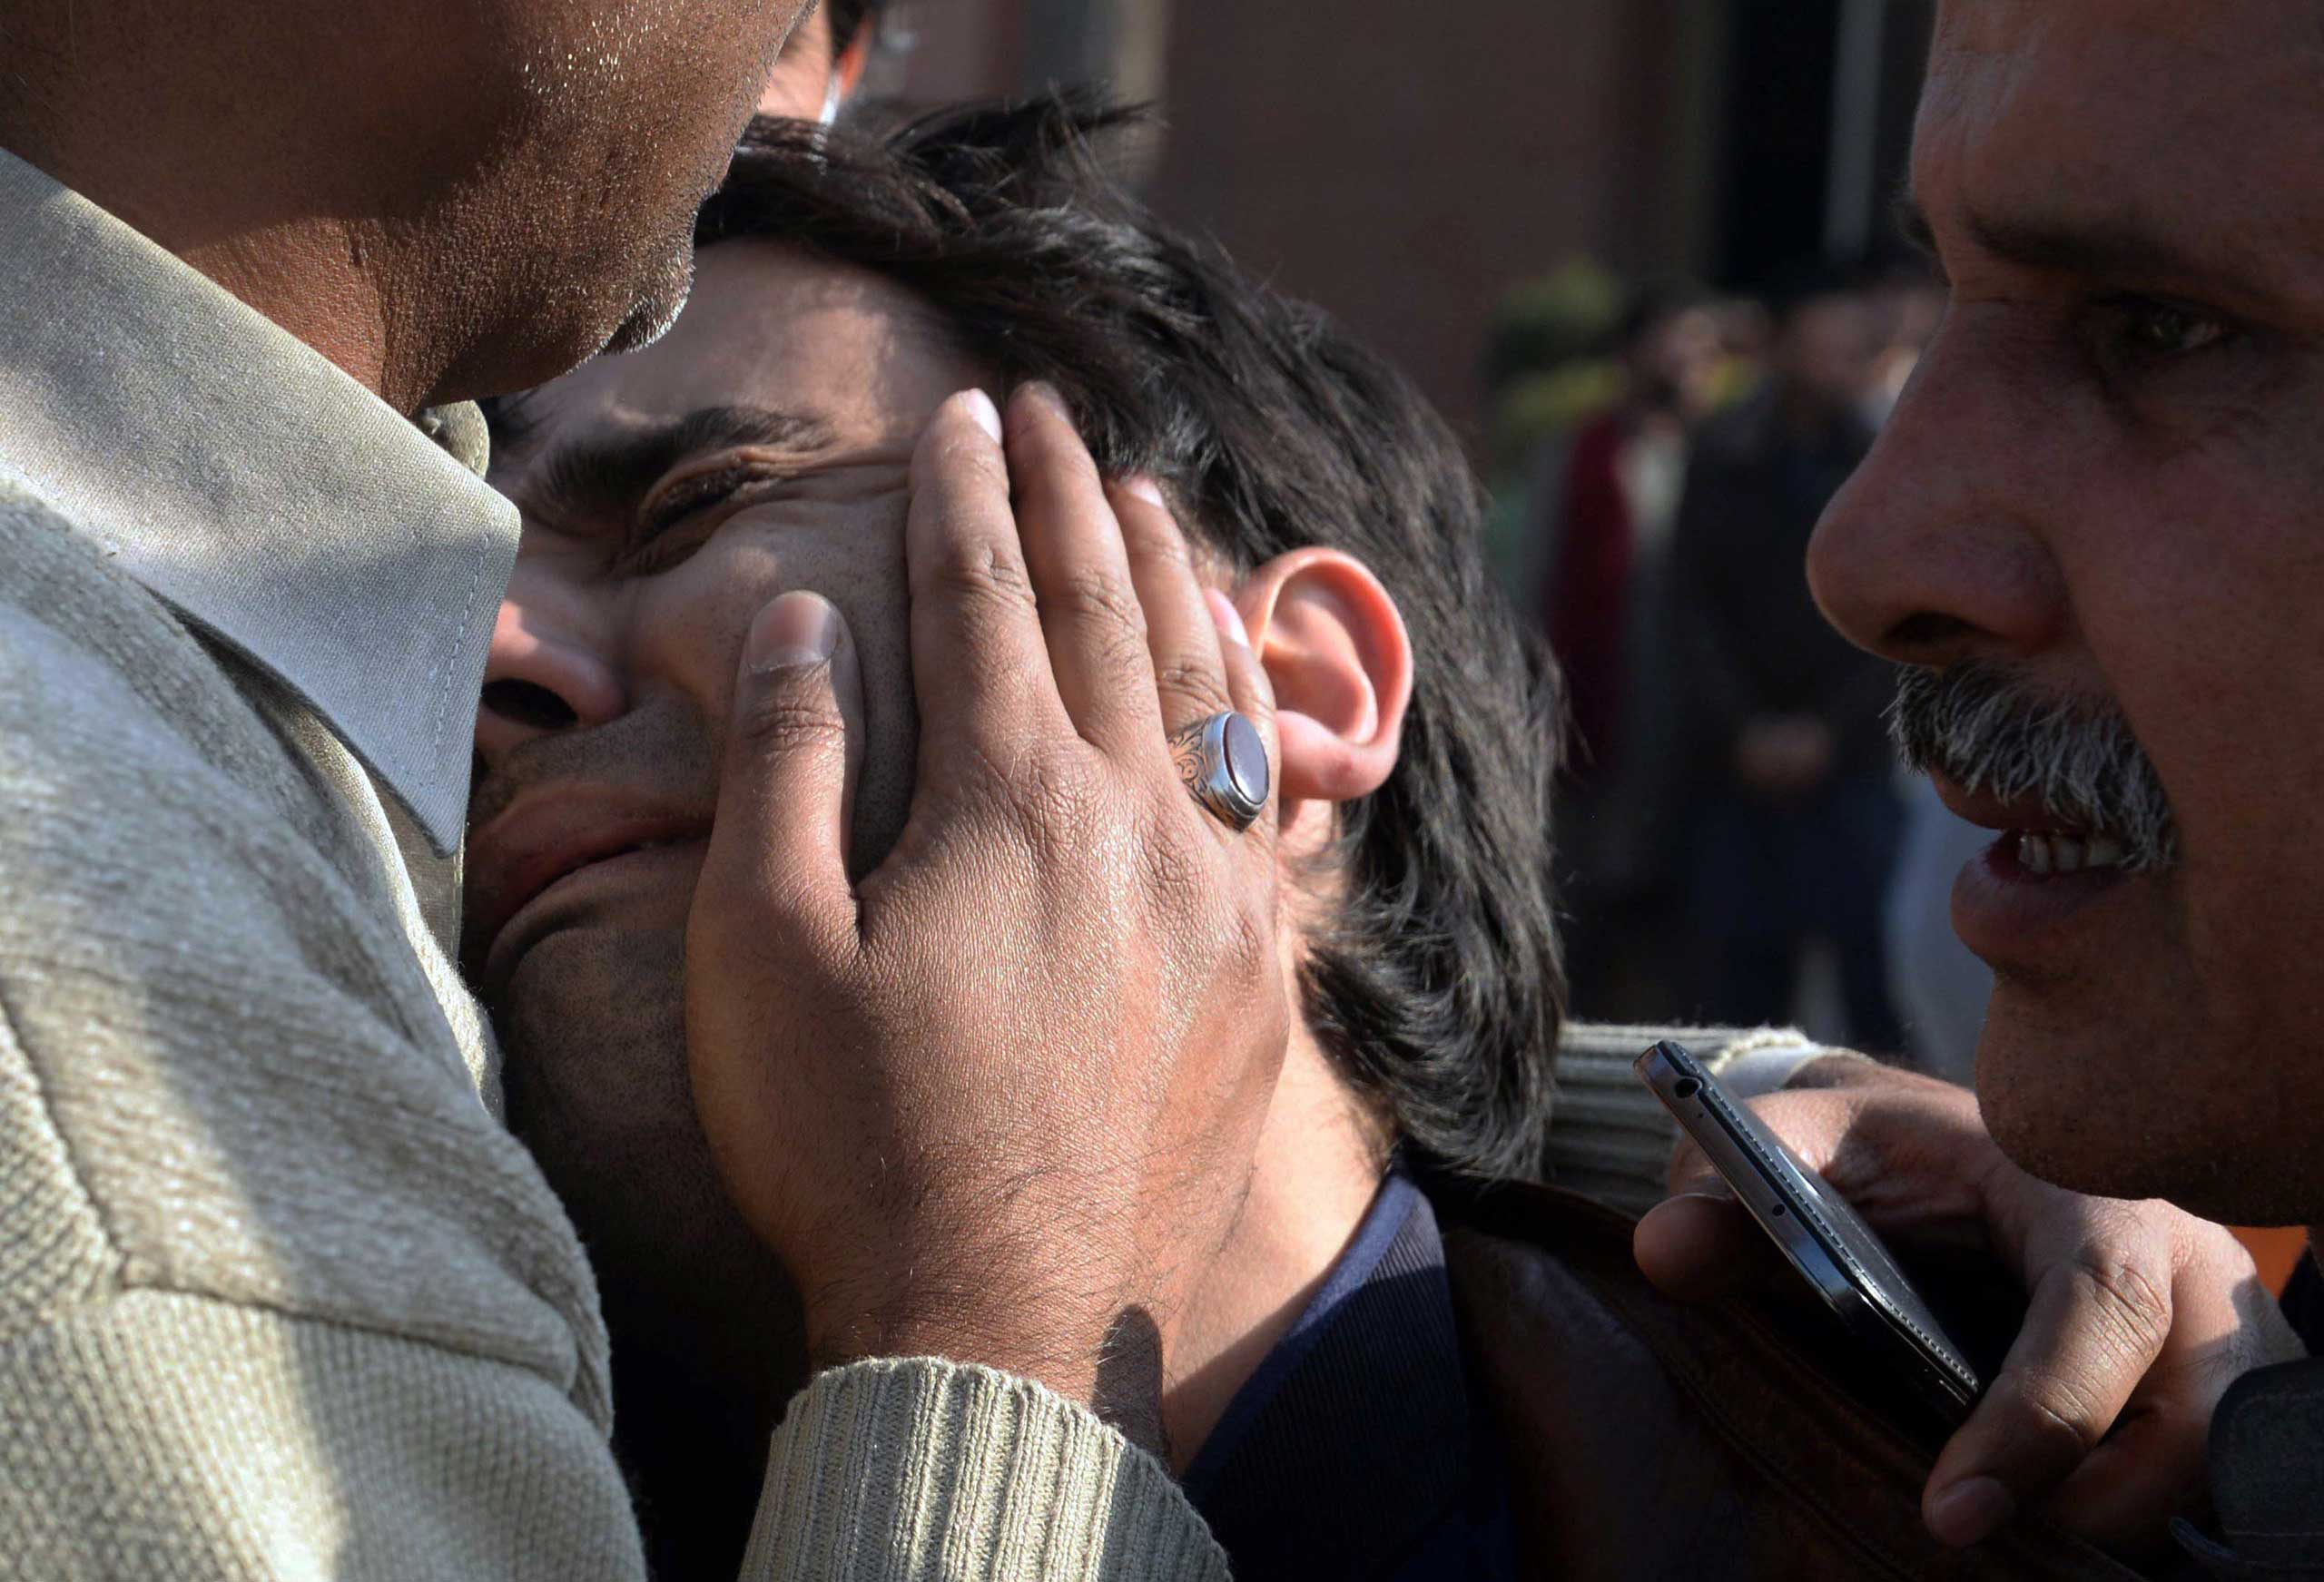 Pakistani relatives comfort a resident following an attack by Taliban militants on a Shi'ite Muslim mosque in Peshawar on Feb. 13, 2015.